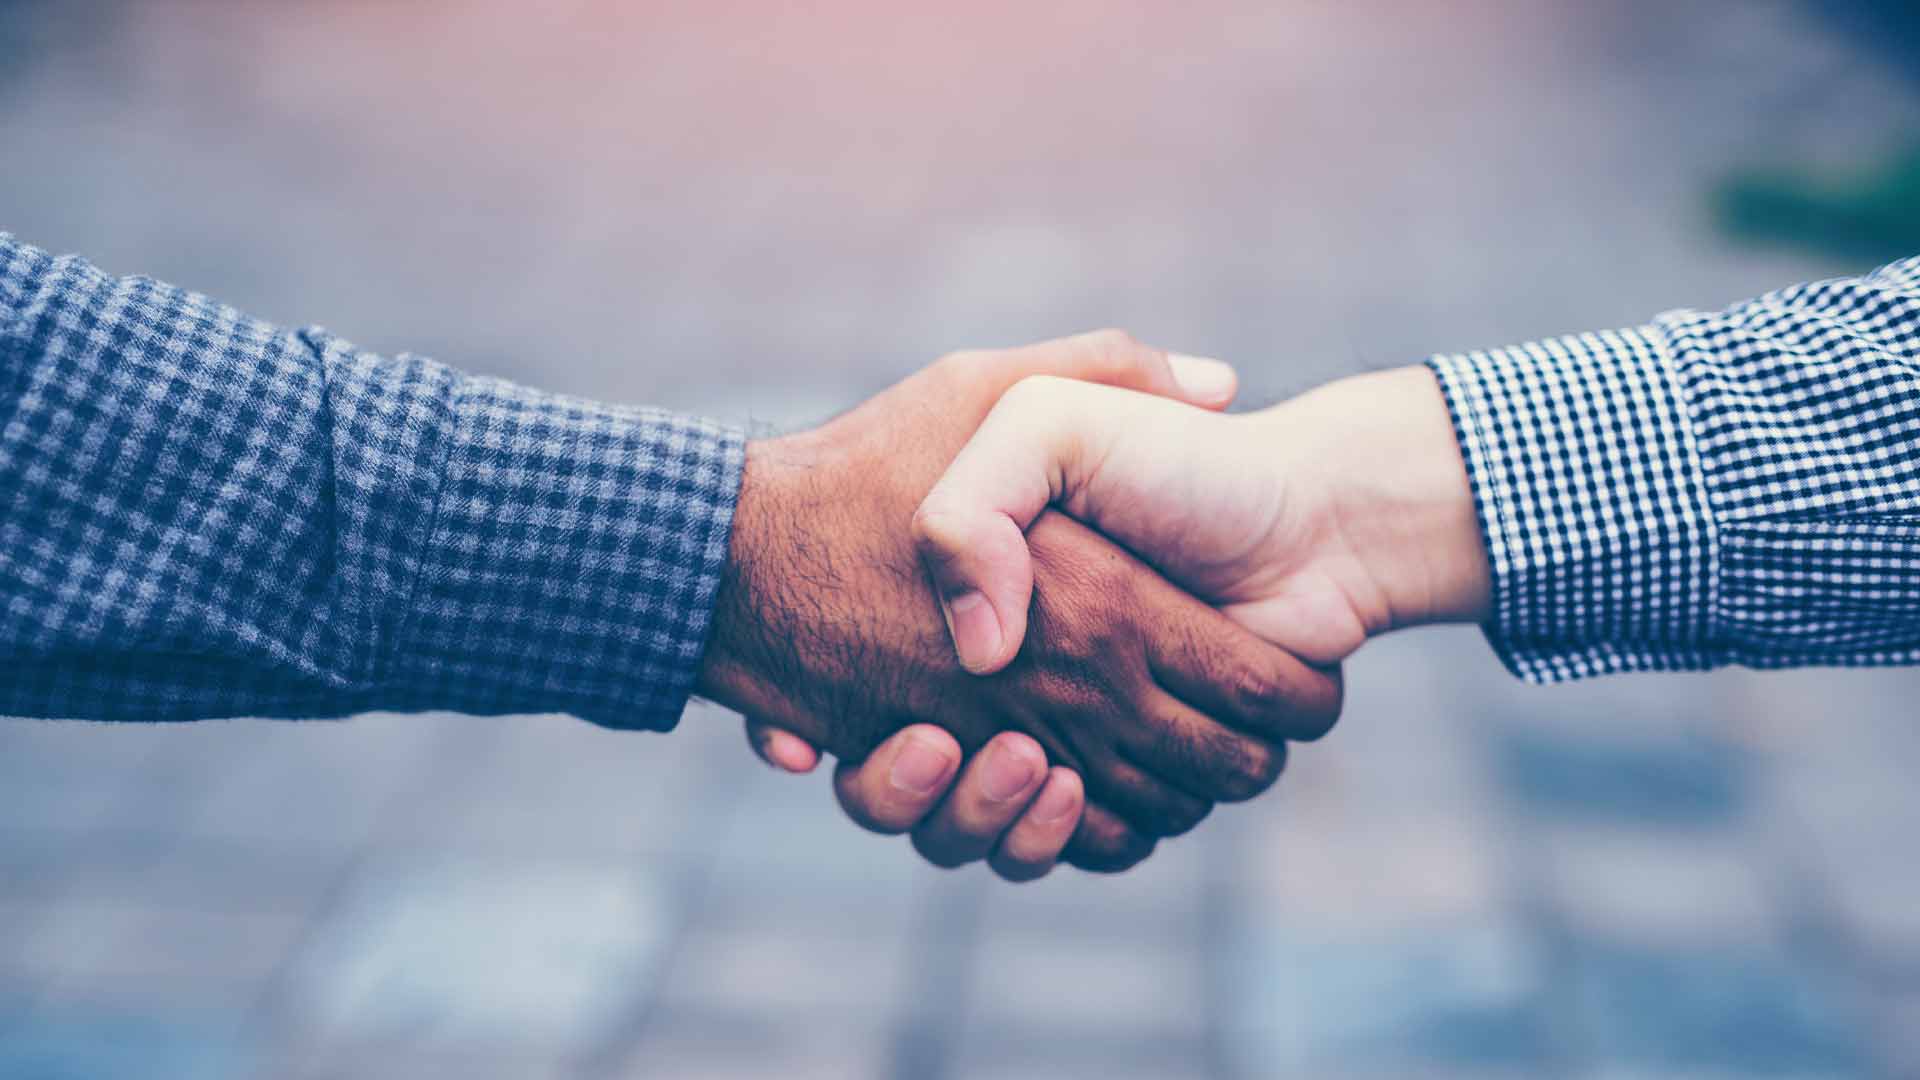 A close-up photo of two people shaking hands outside.